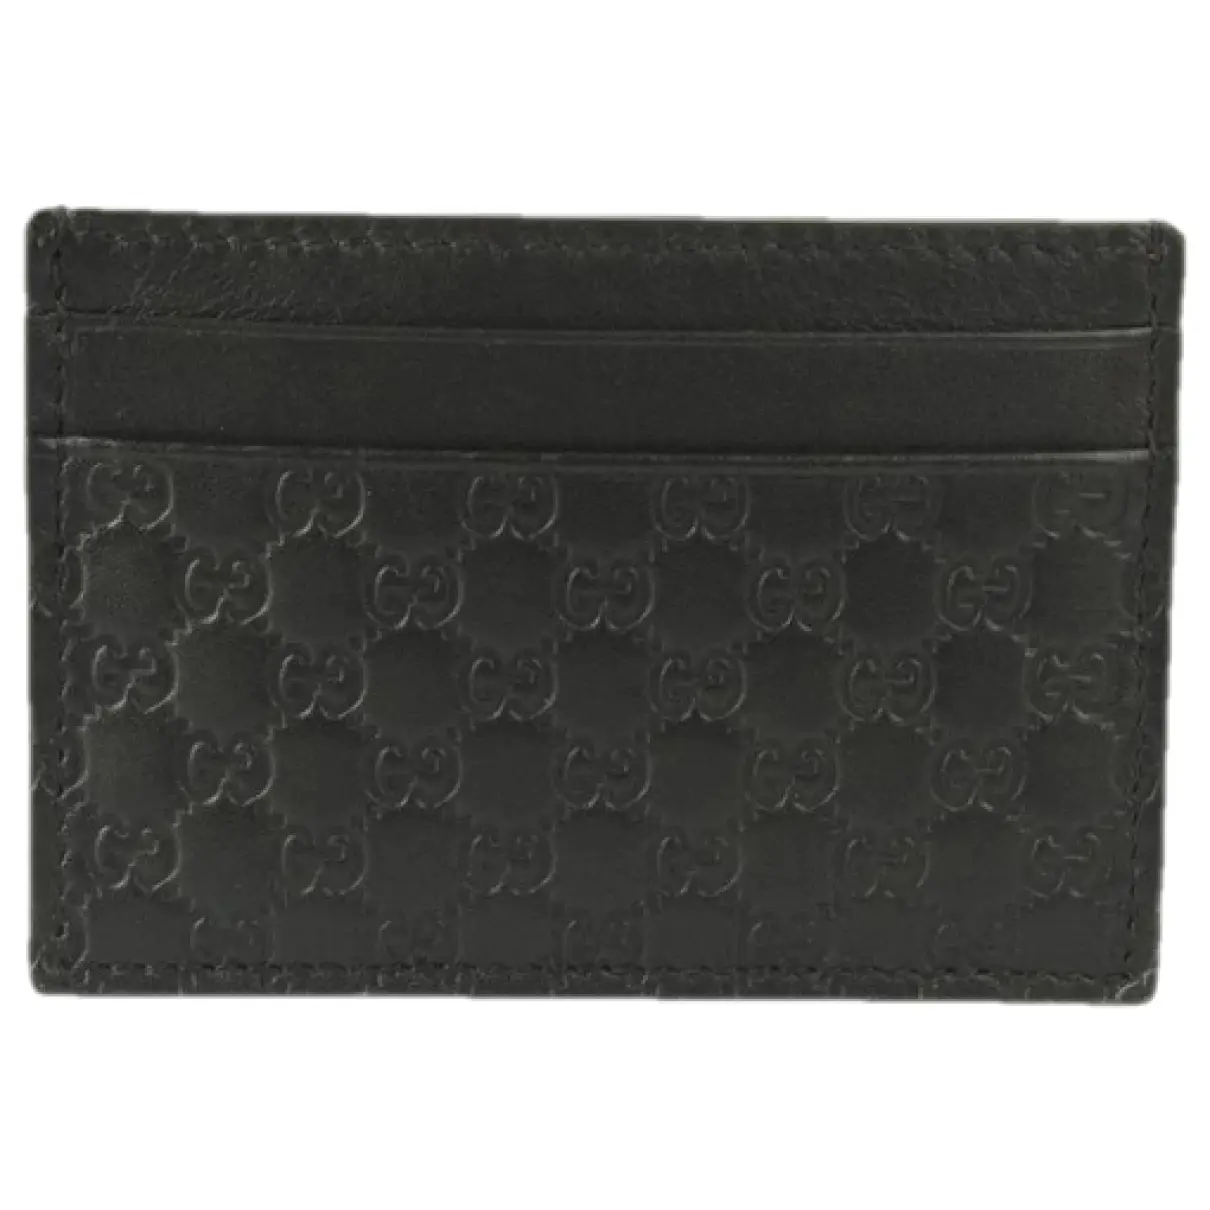 Marmont leather wallet